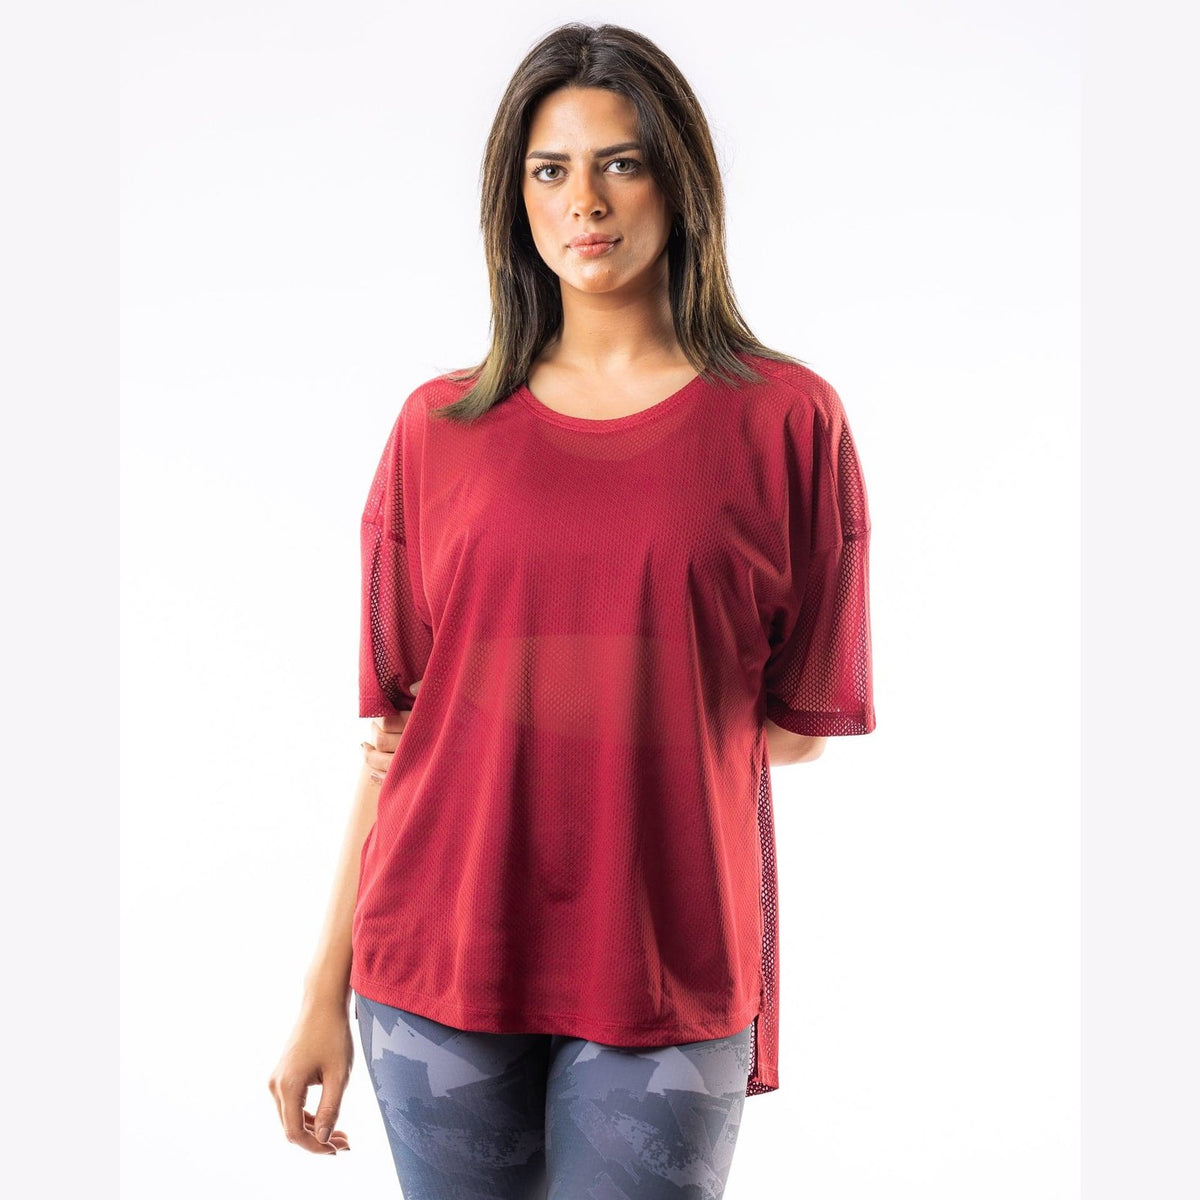 Breathable Mesh T-Shirt in Burgundy - Sporty Pro